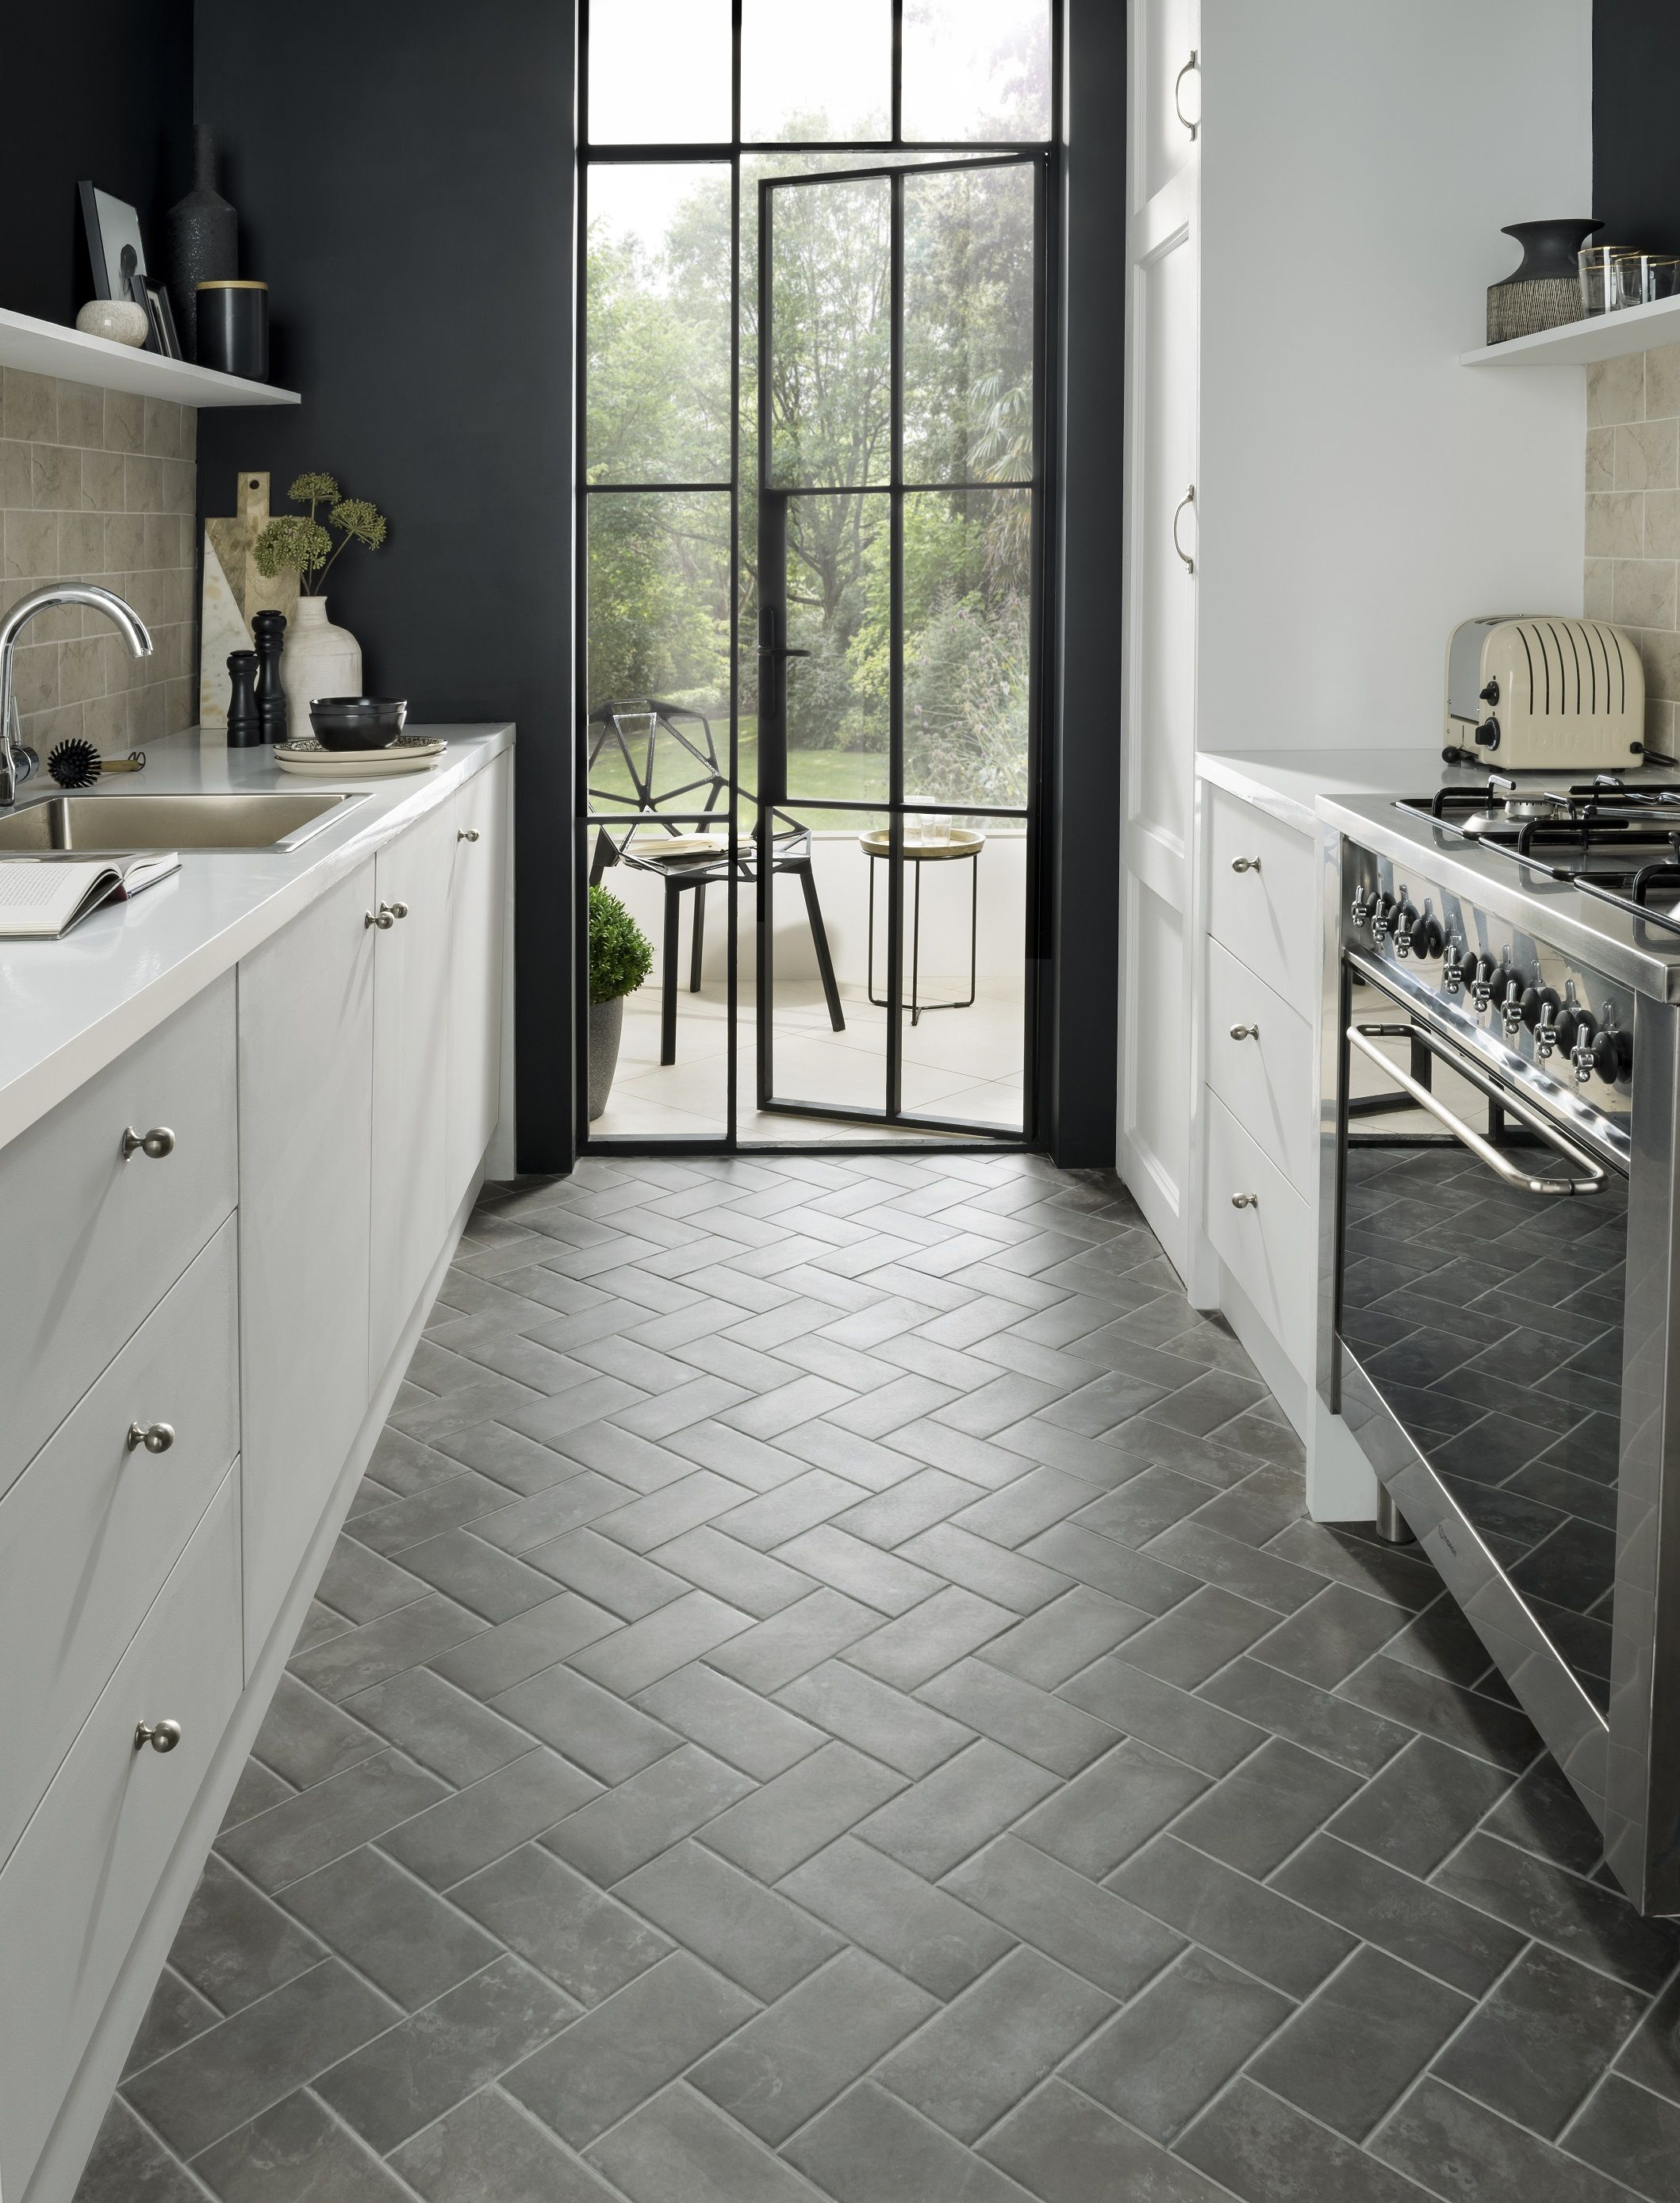 11 Tile Design Ideas To Make A Small Kitchen Feel Bigger pertaining to size 2118 X 2777